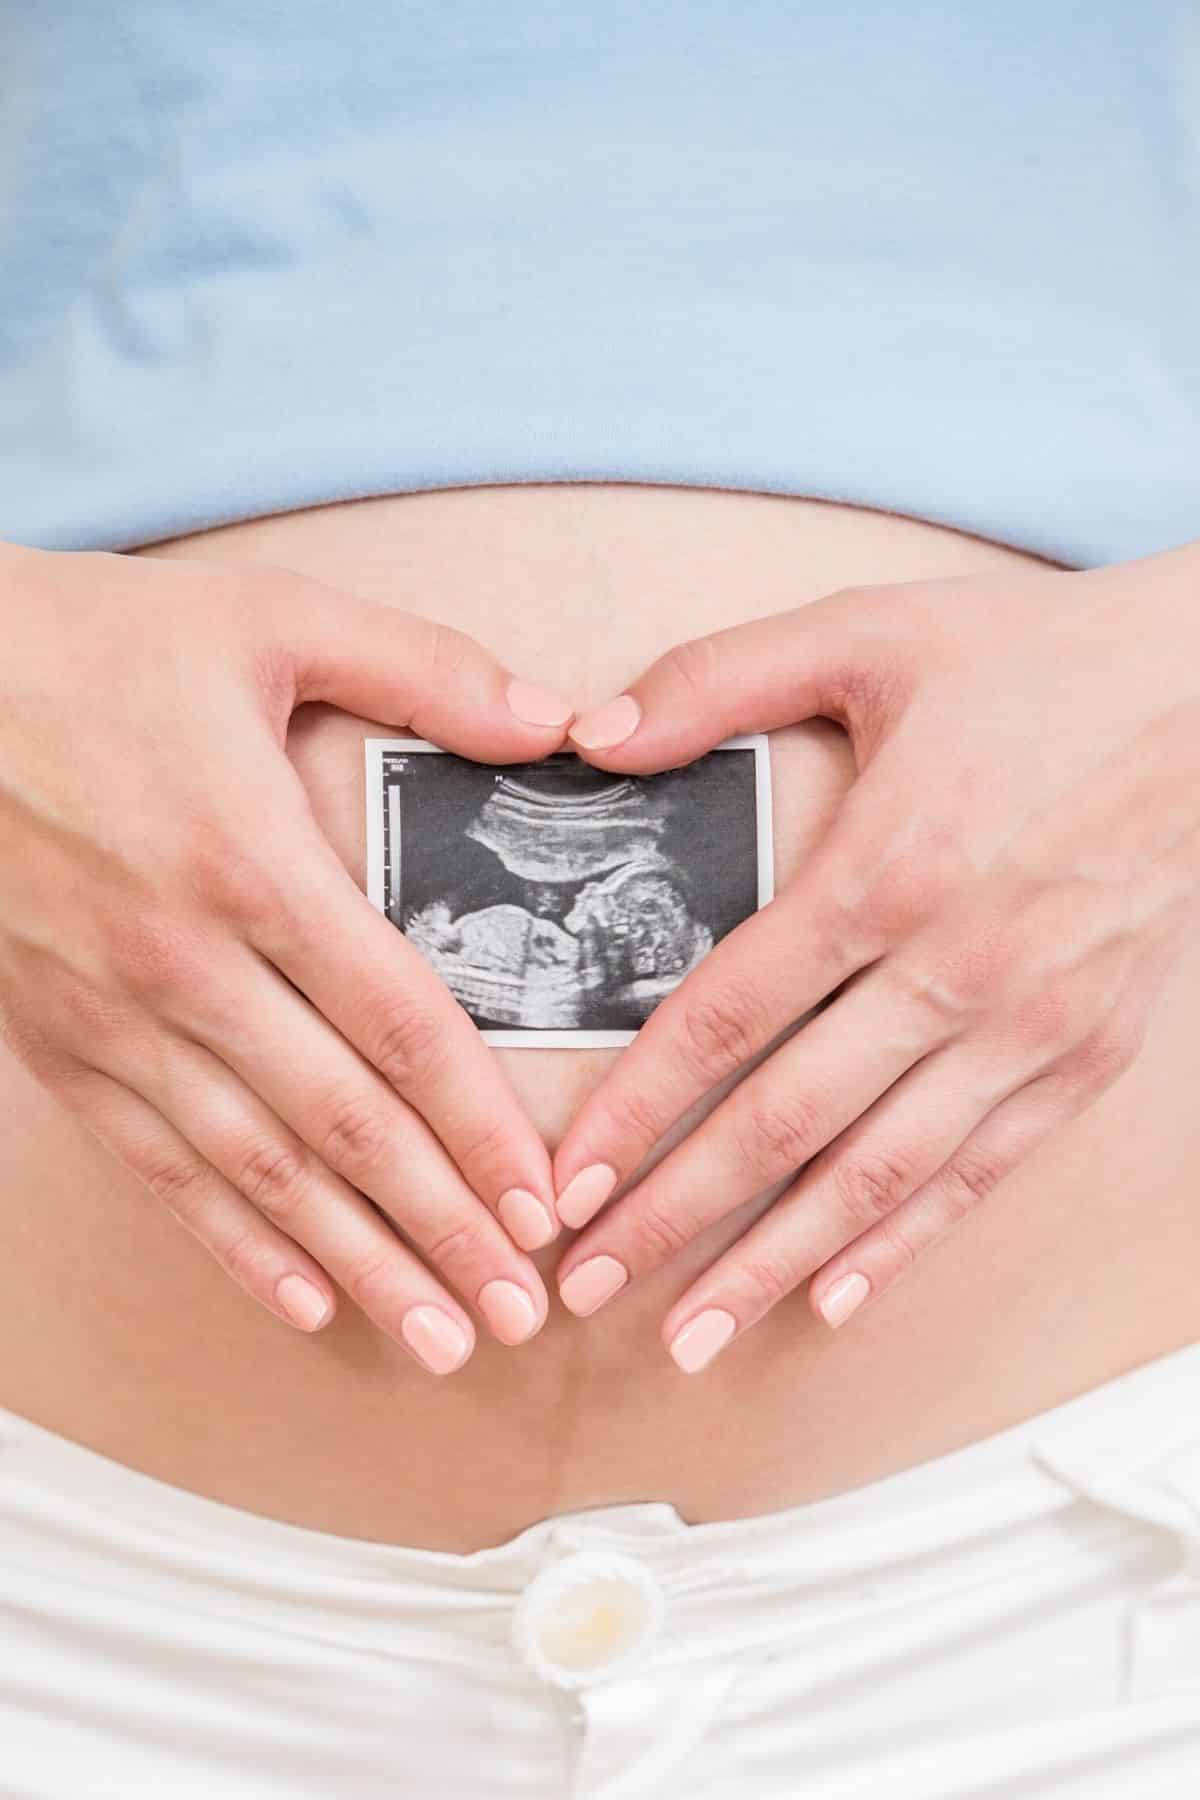 pregnant woman holding ultrasound picture.